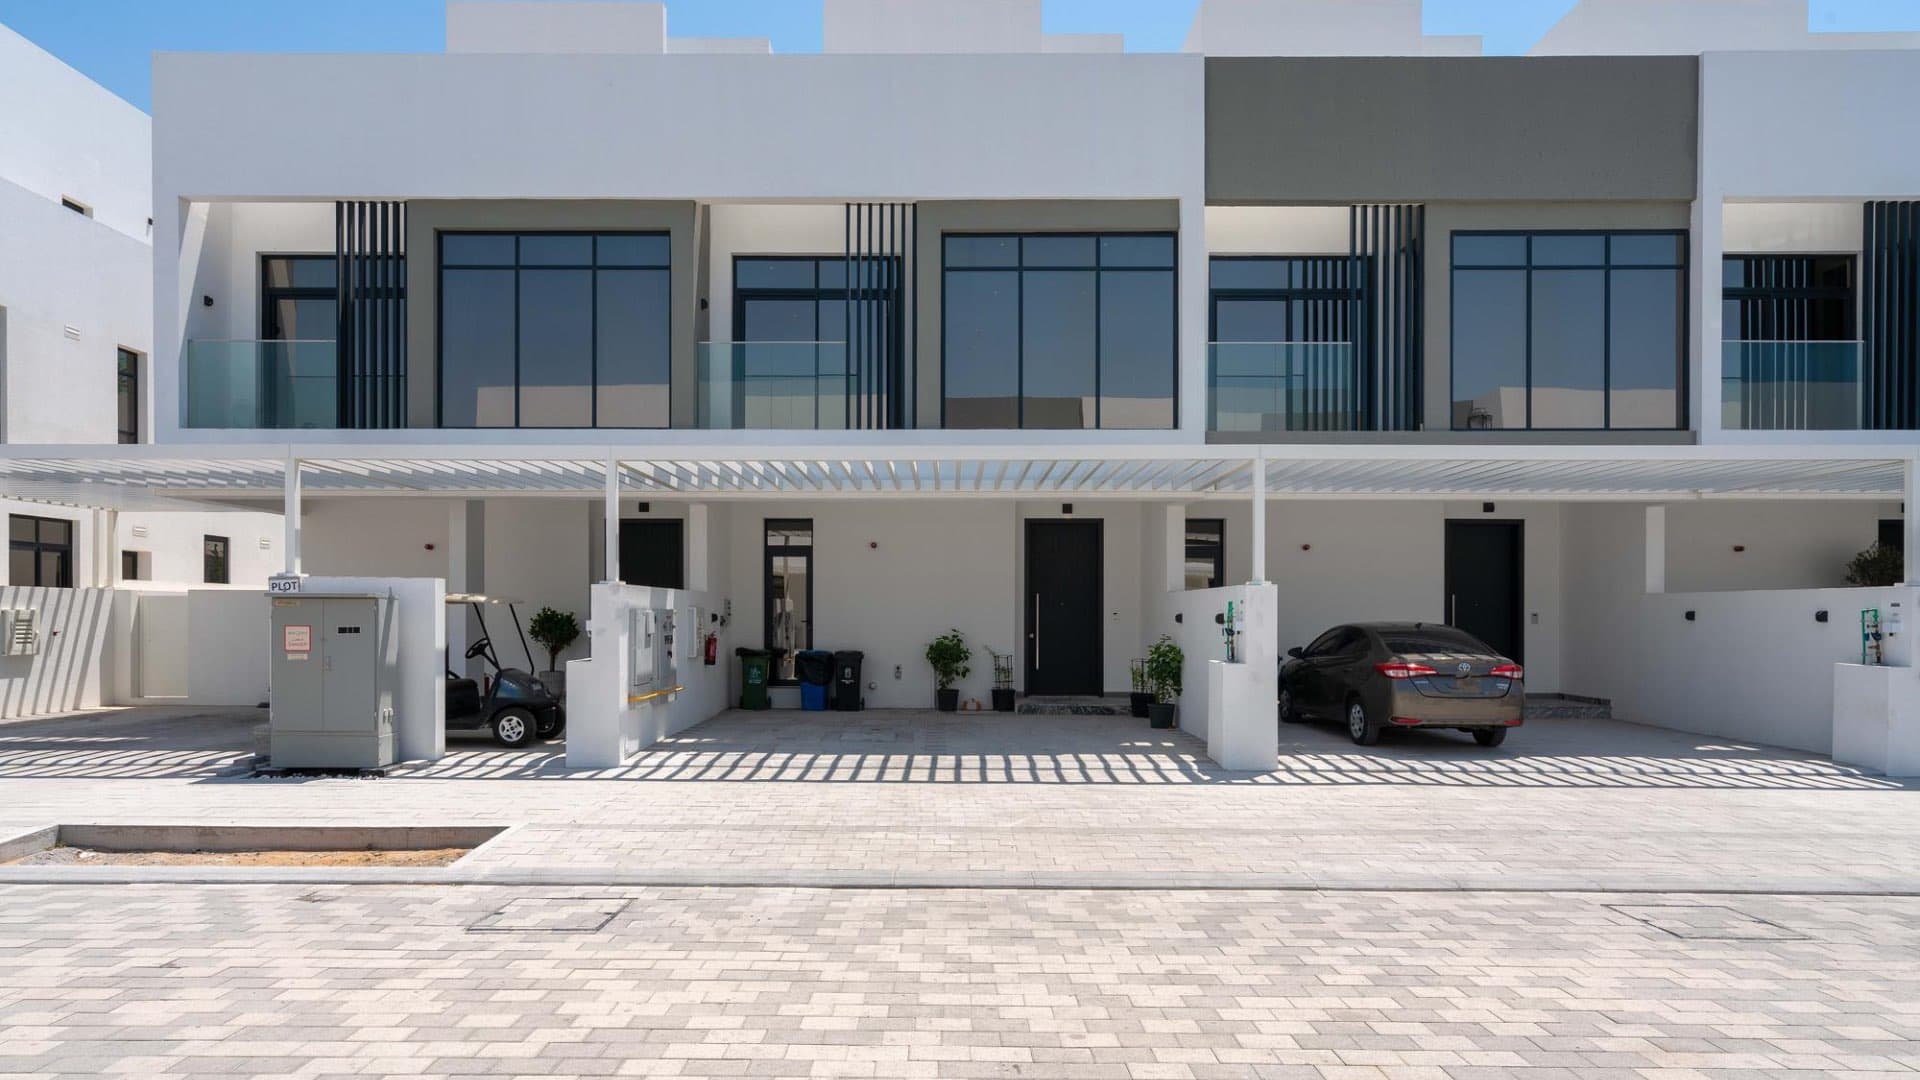 3 Bedroom Townhouse For Sale Jumeirah Luxury Living Lp07730 Ad1b2dd1009a080.jpg